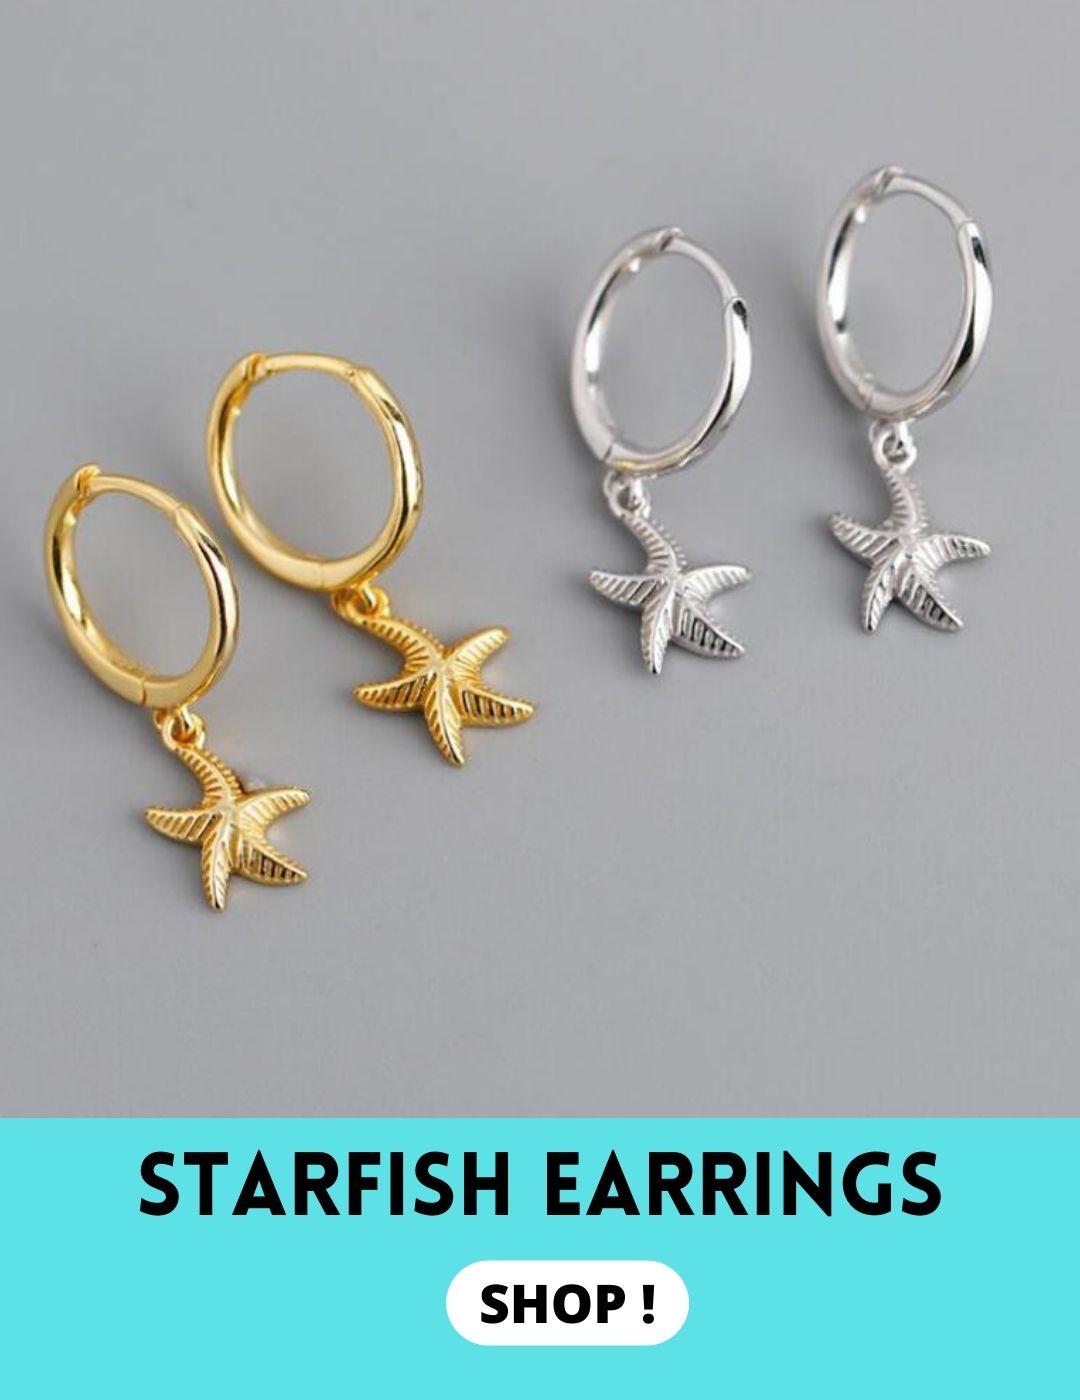 Why are starfish colors different